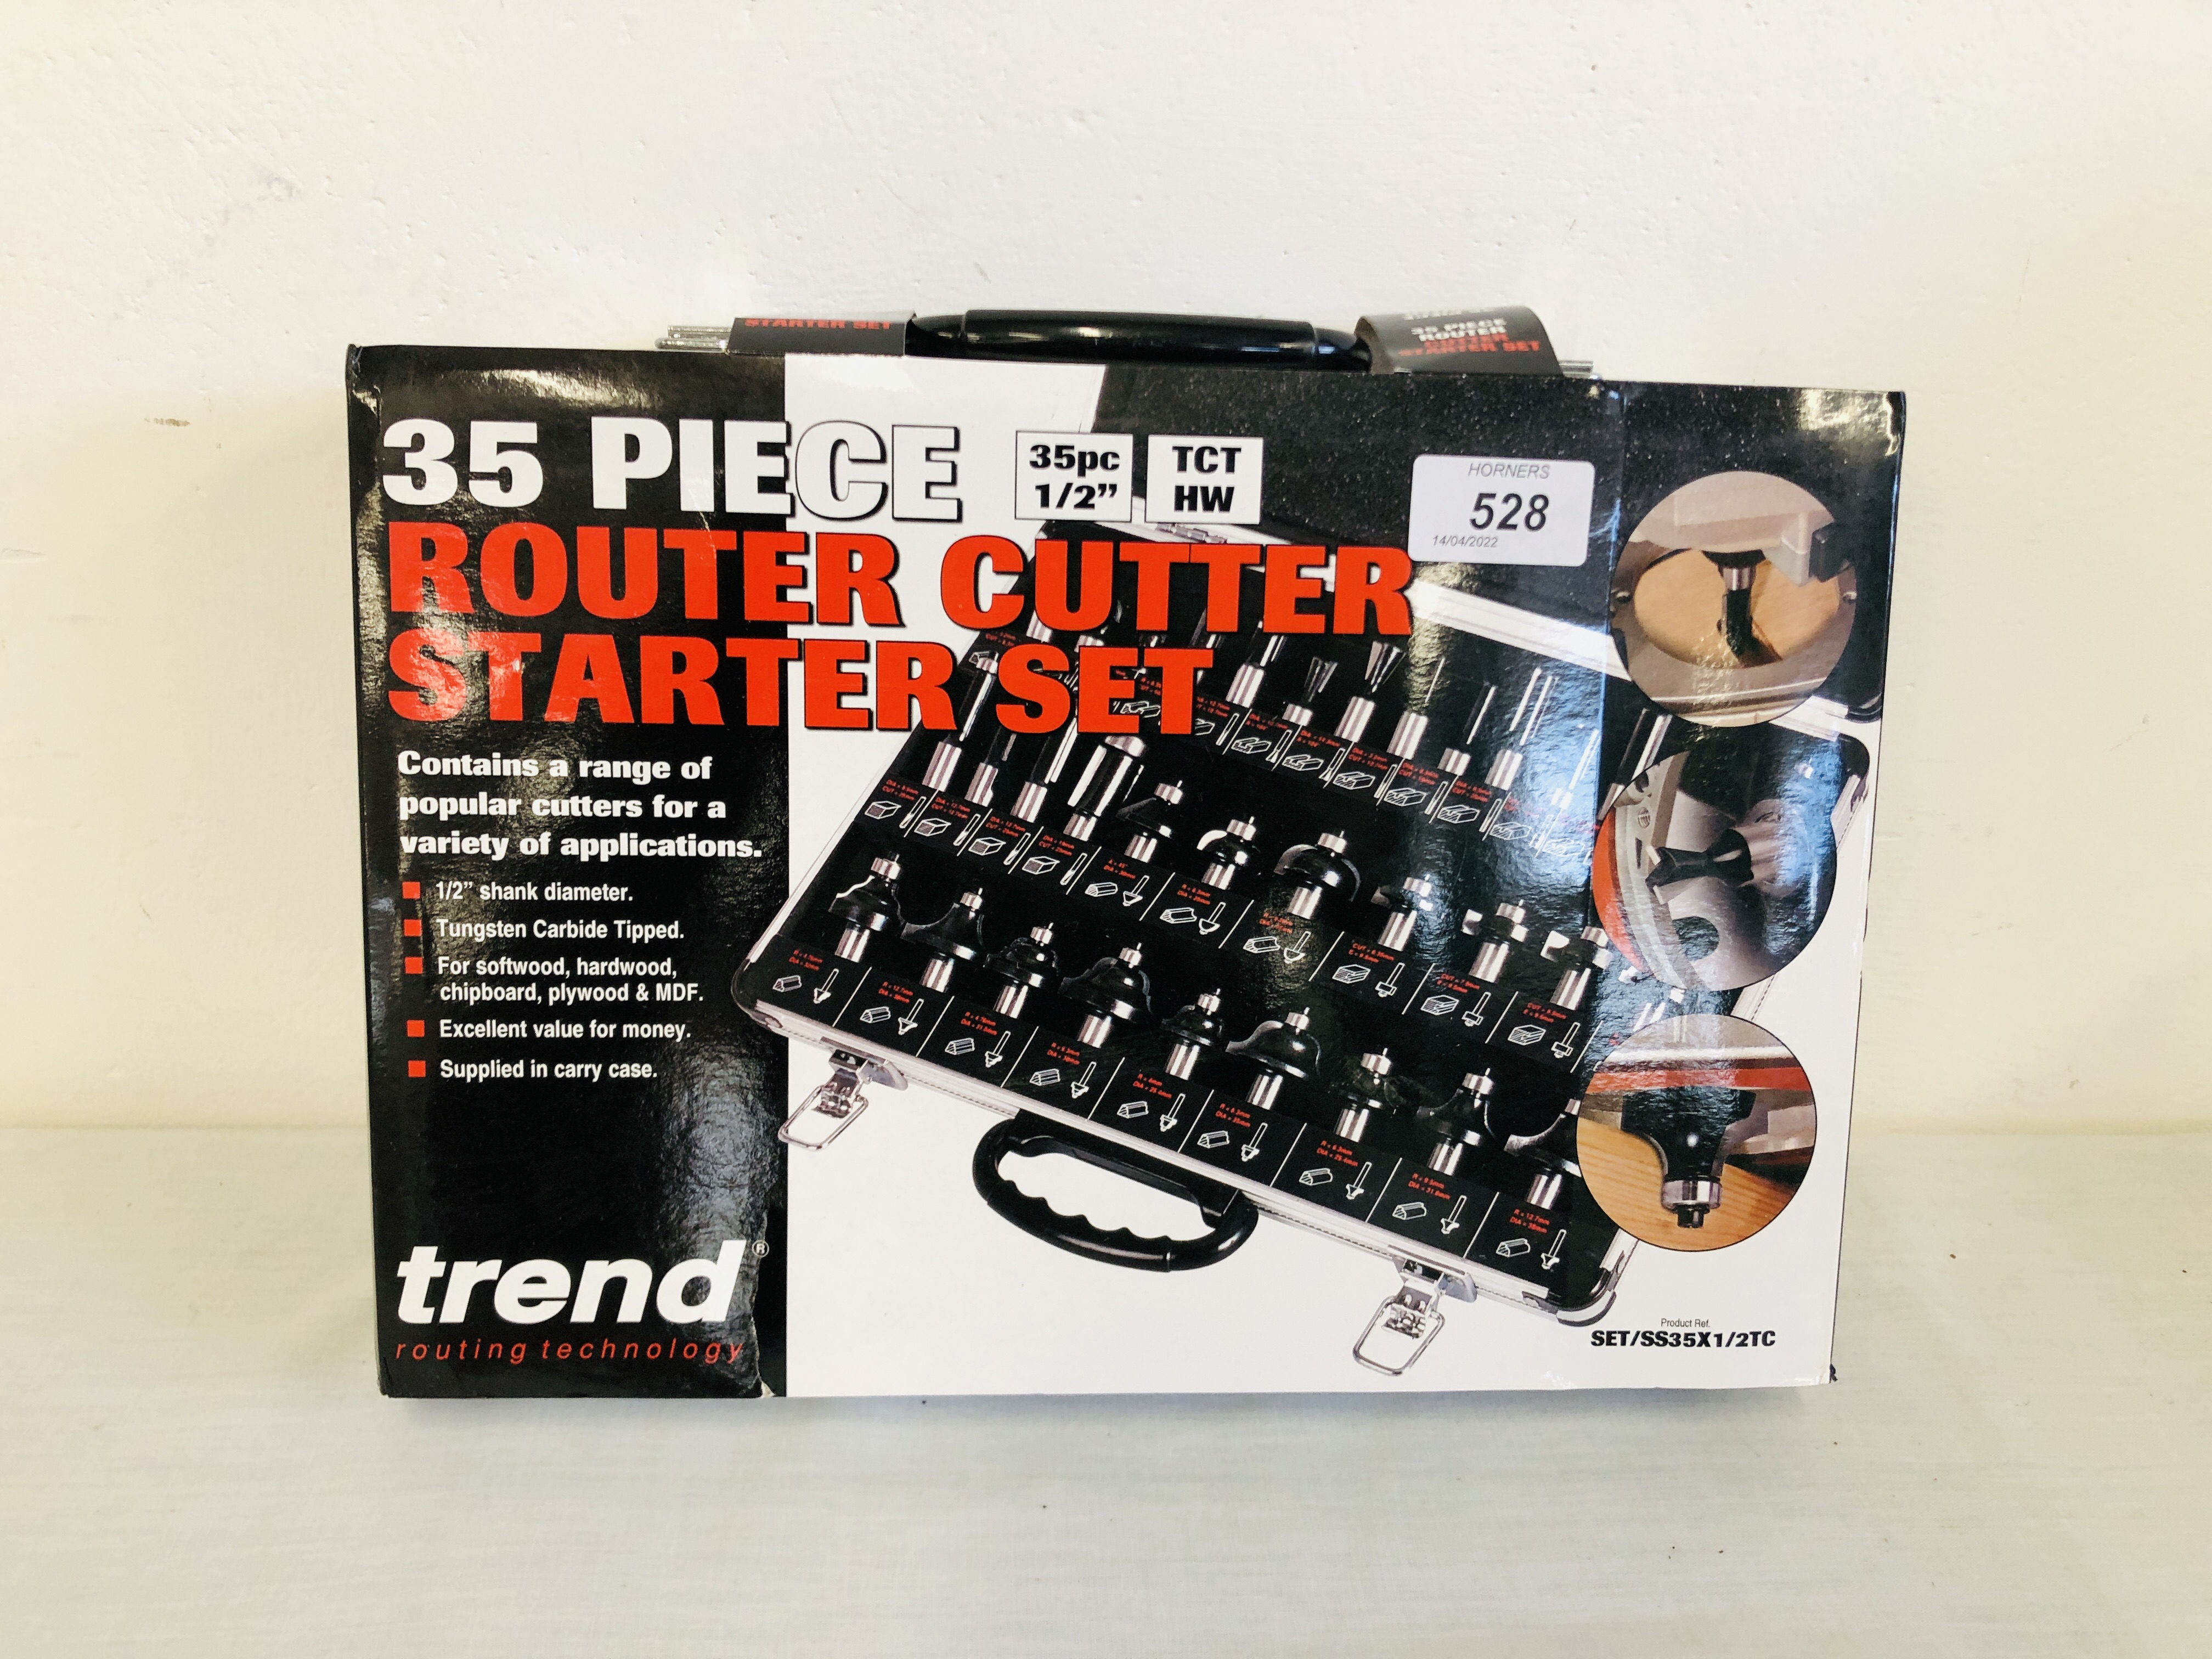 A CASED 35 PIECE SET OF TREND ½ INCH ROUTER CUTTER BITS (APPEARS UNUSED) - SOLD AS SEEN.